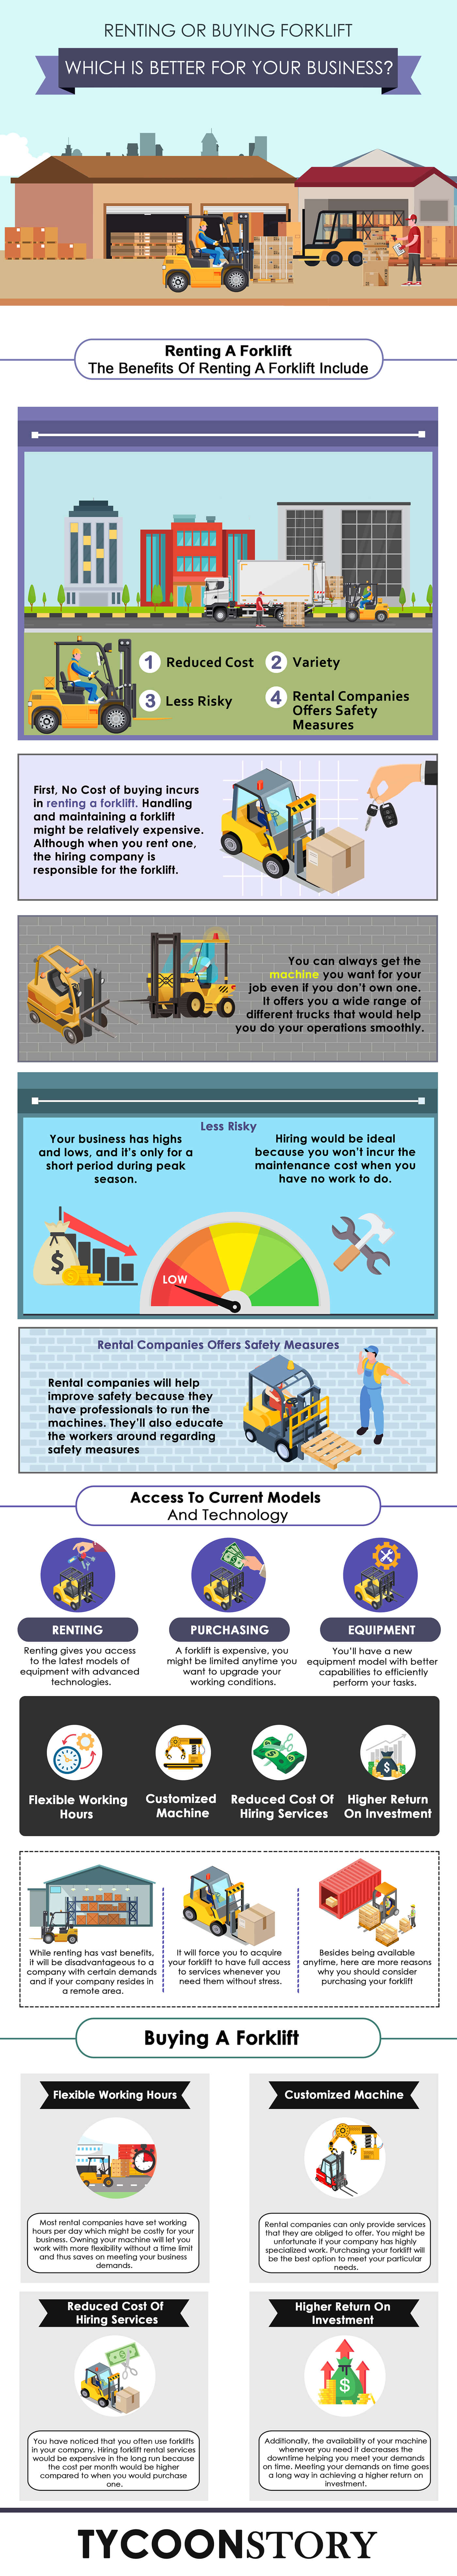 Renting or buying forklifts which is better for your business buying forklifts infographic